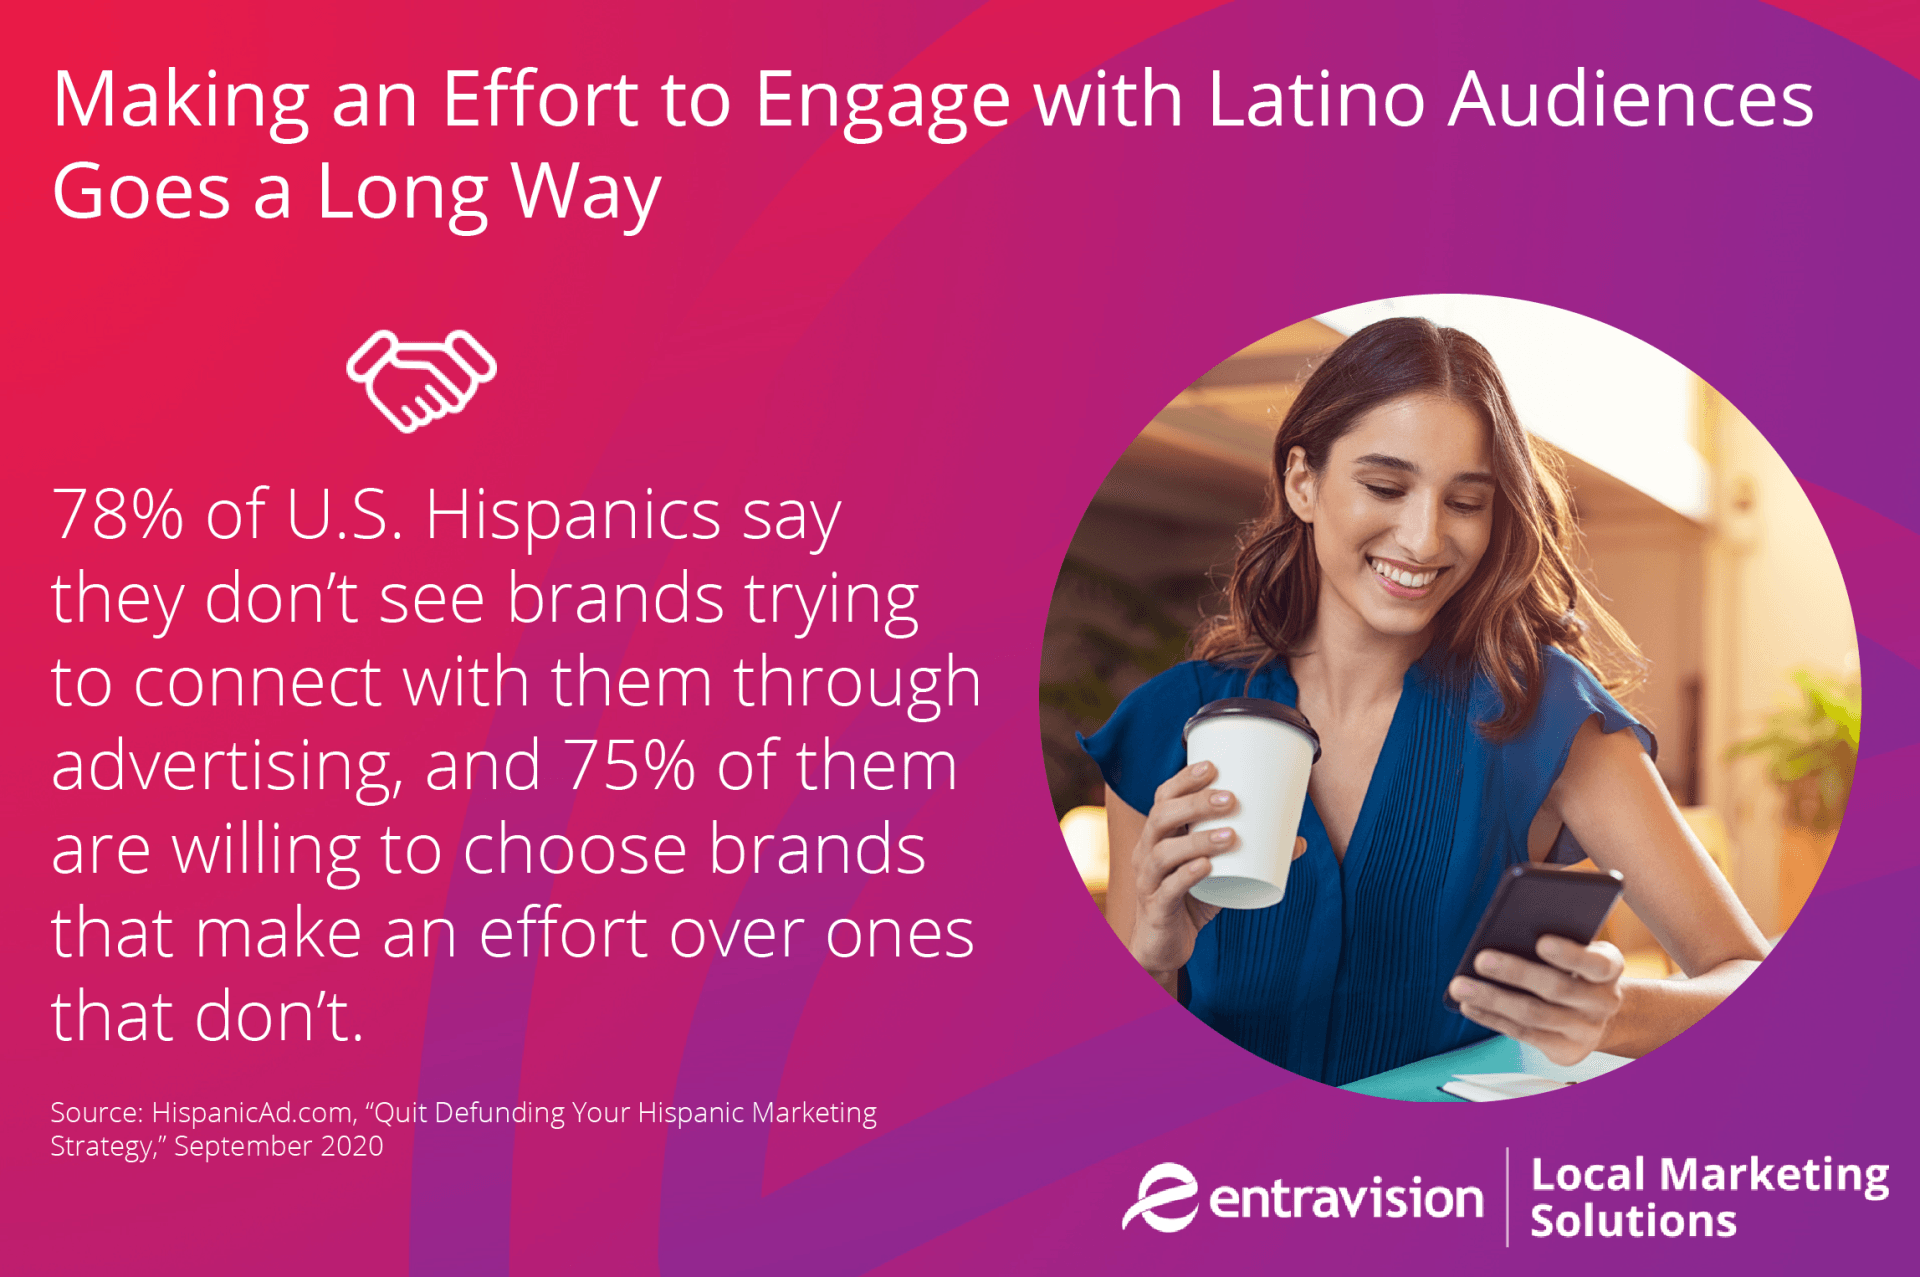 An infographic from Entravision shows that making an effort to engage with Latino audiences goes a long way. U.S. Hispanics are willing to choose brands that make an effort to connect wit them over ones that don't.